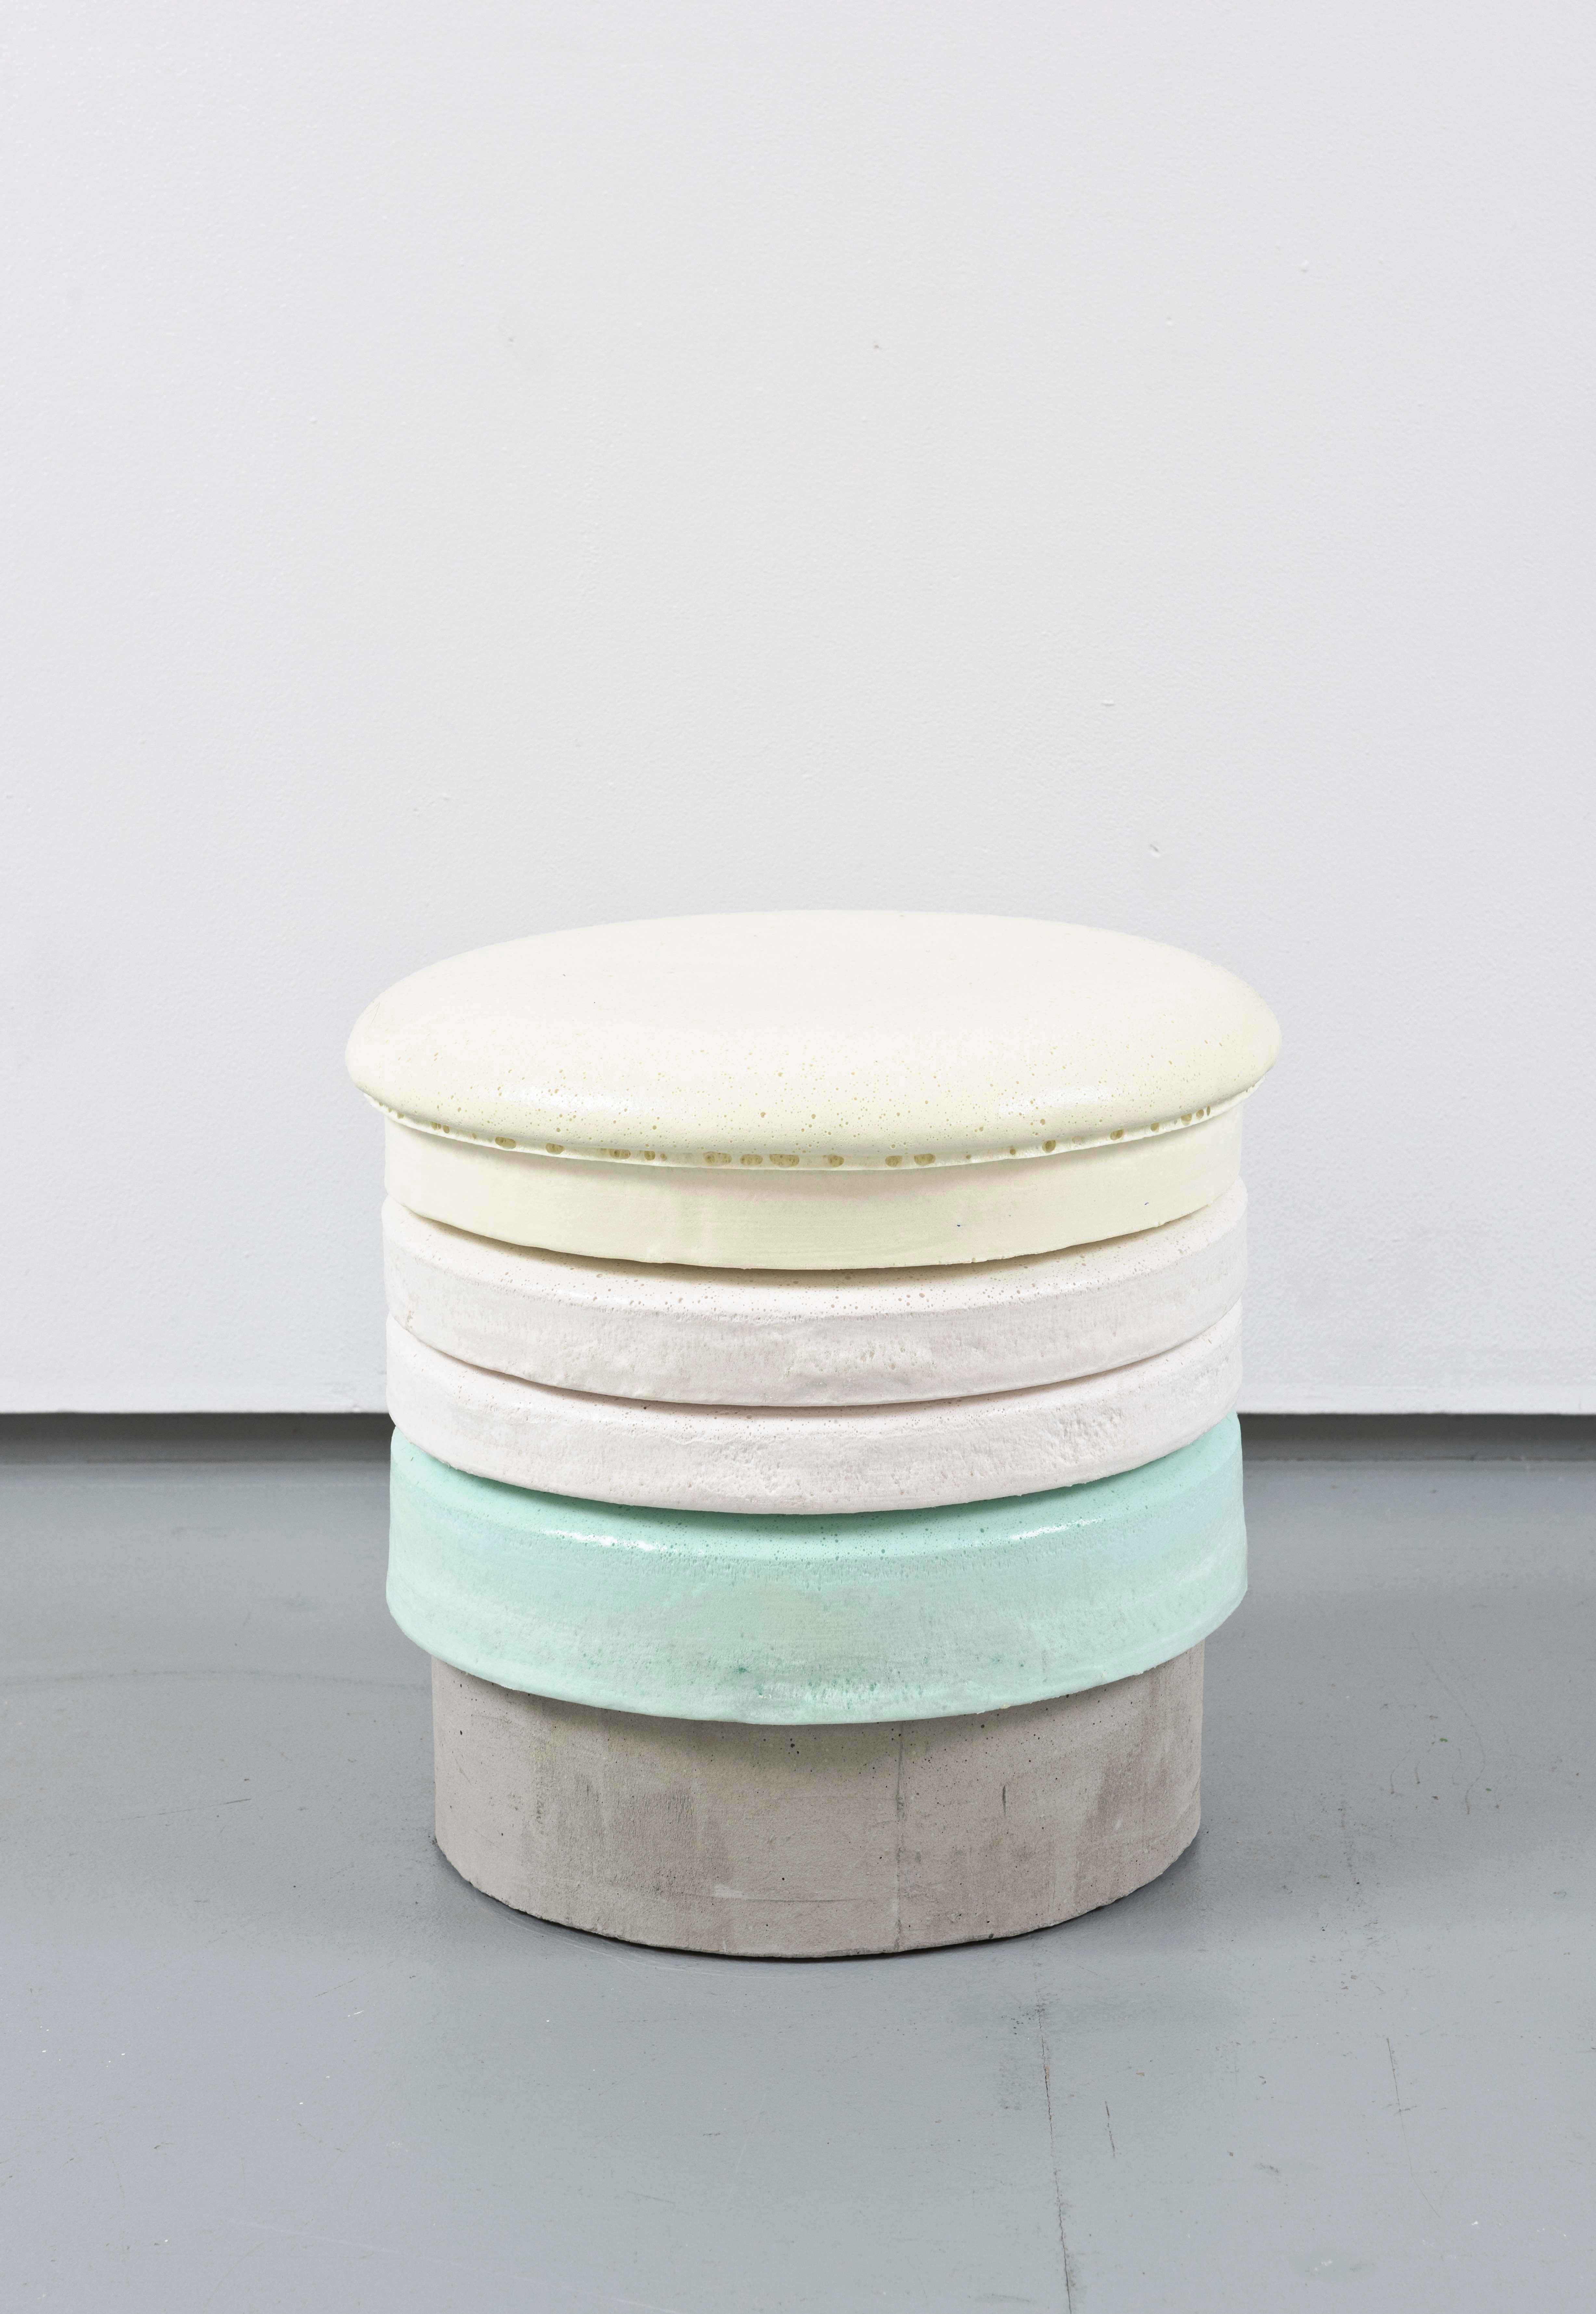 Cristian Andersen
Macaron Stool, 2020
Each unique, signed by the artist
Polyurethane, pigments, concrete and cork
Measures: H 39 cm (15 3/8 in), Ø 37 cm

Cristian Andersen (*1974) has been working at the interface between design and sculpture